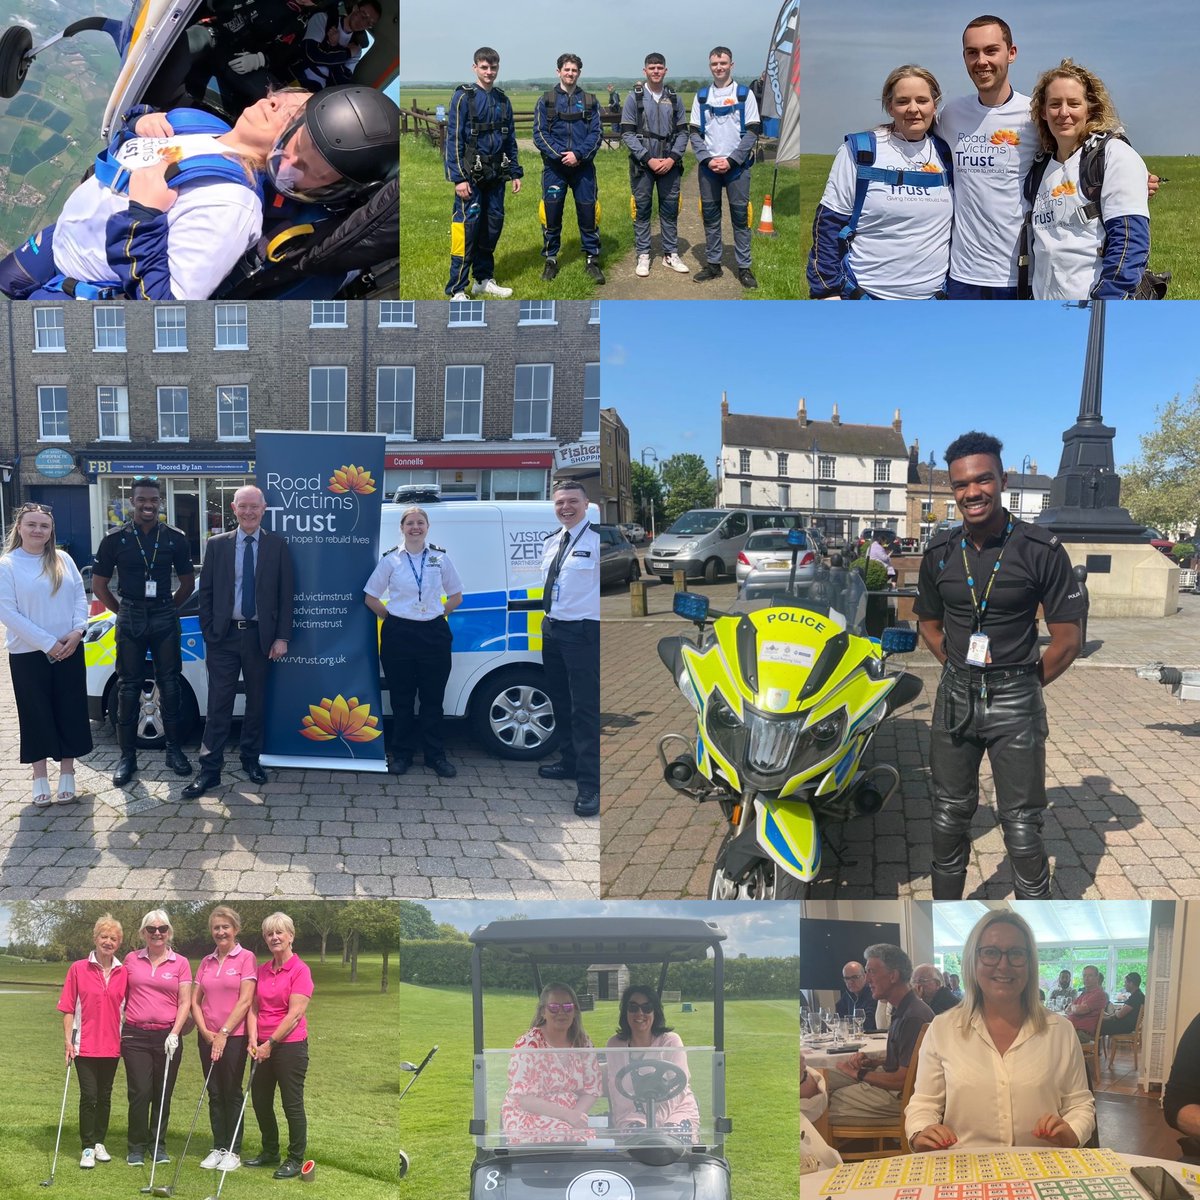 What a week!
Thank you to all of our supporters and working partners who helped make last week a huge success! 🧡
#ProjectEDWARD
#MentalHealthAwarenessWeek
#RoadSafetyWeek
@ProjectEdward @CambsRoadSafety @HCCSolicitors